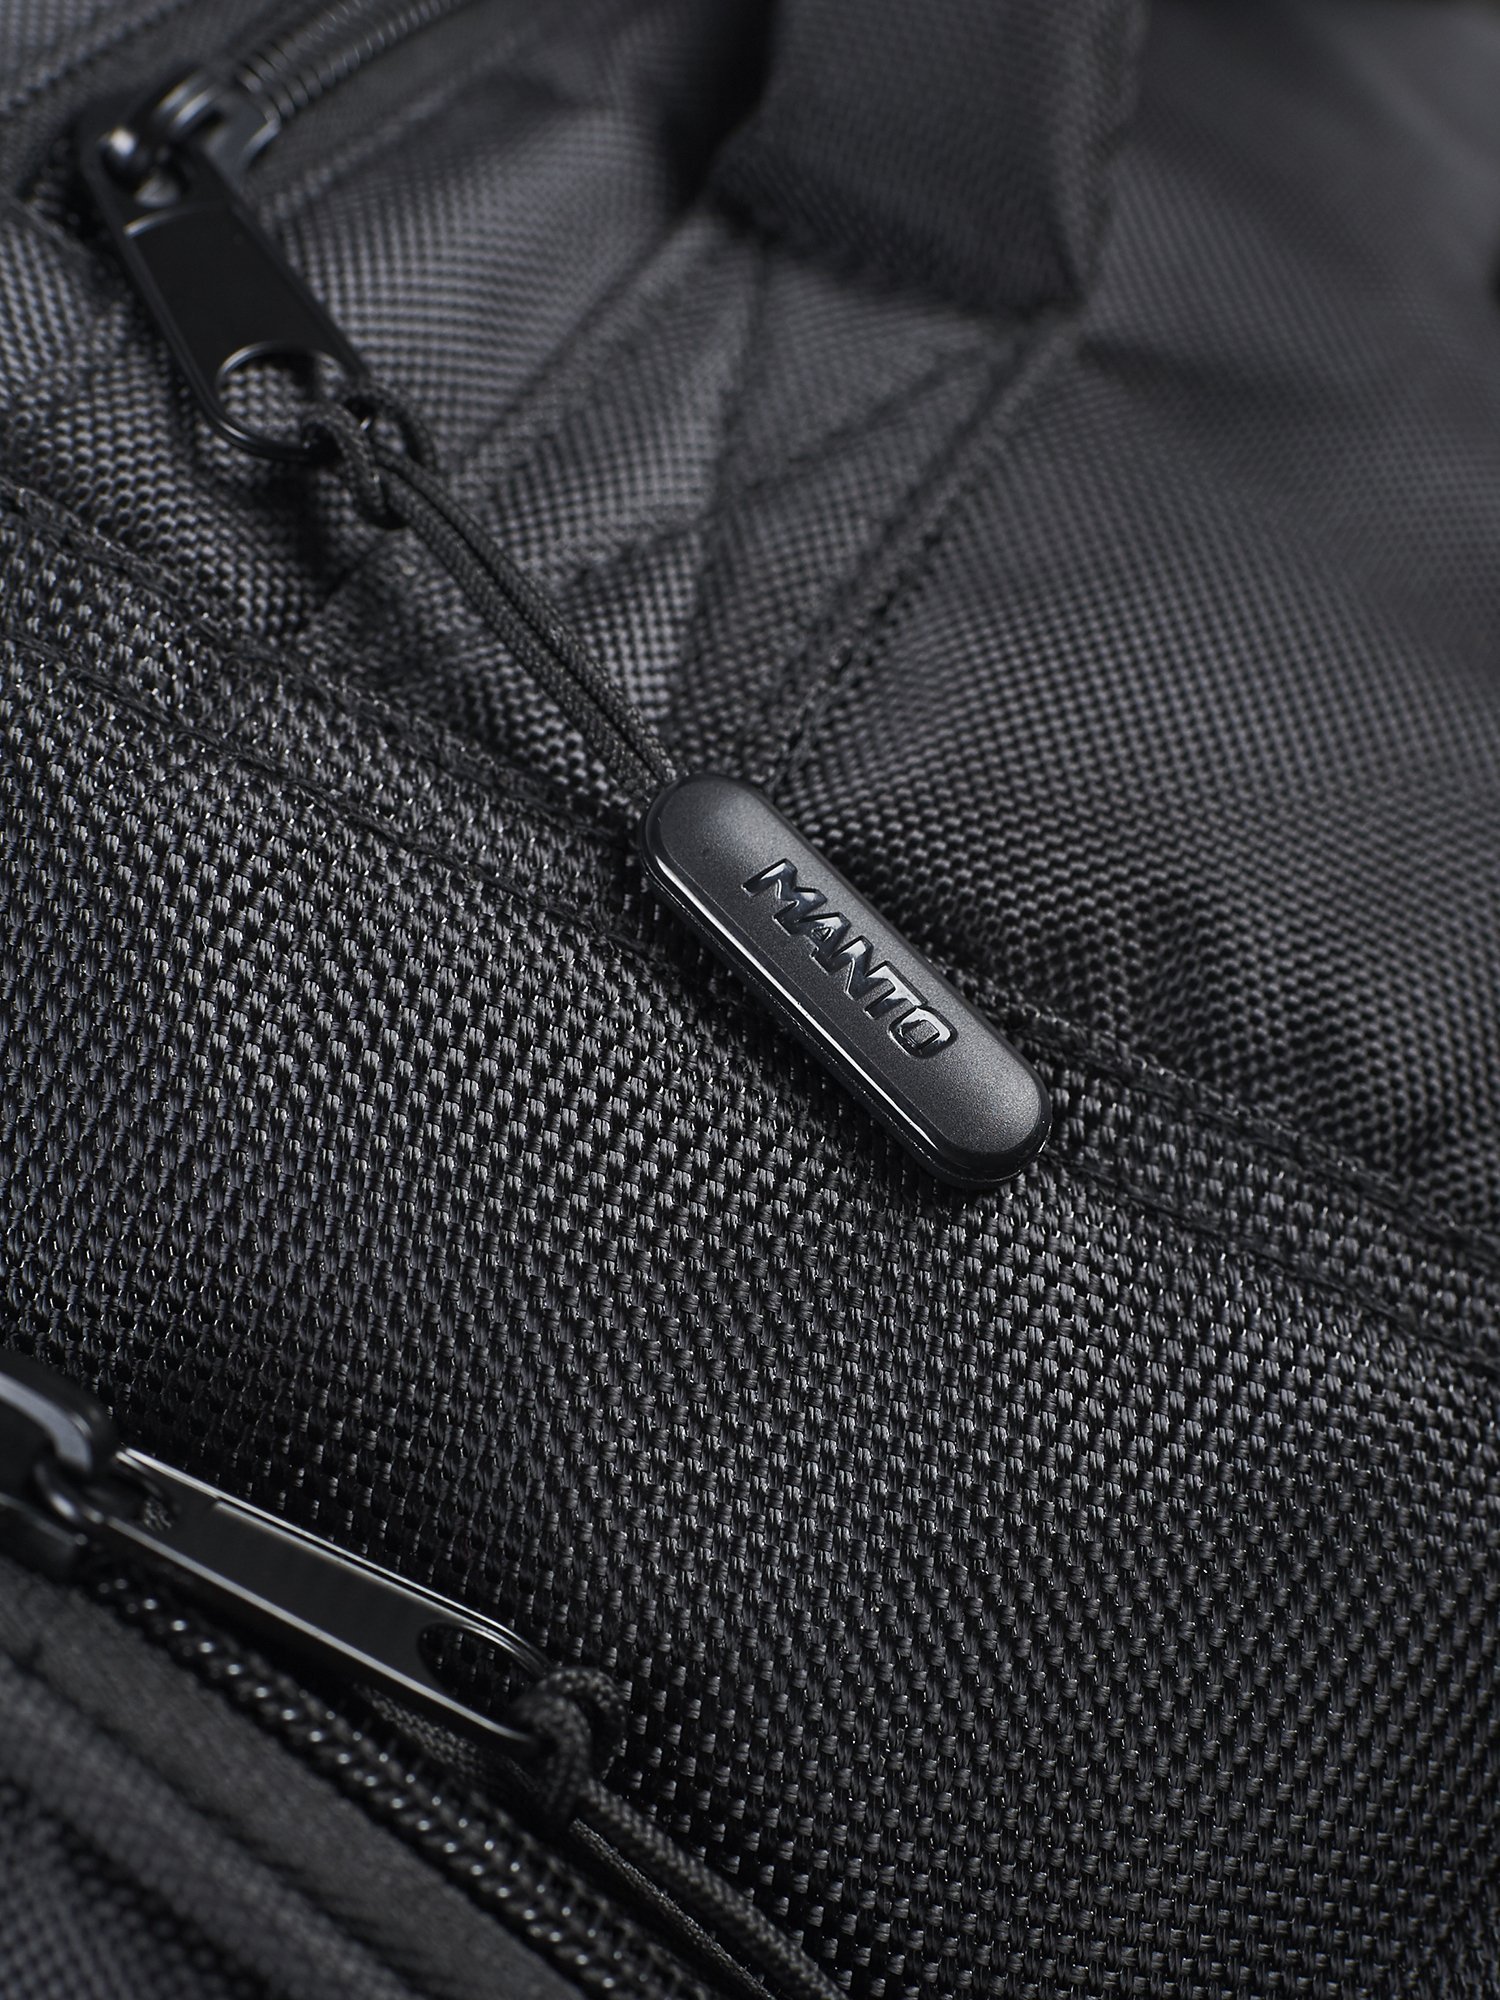 MANTO XL convertible backpack ONE | ACCESSORIES EQUIPMENT \ BAGS ...